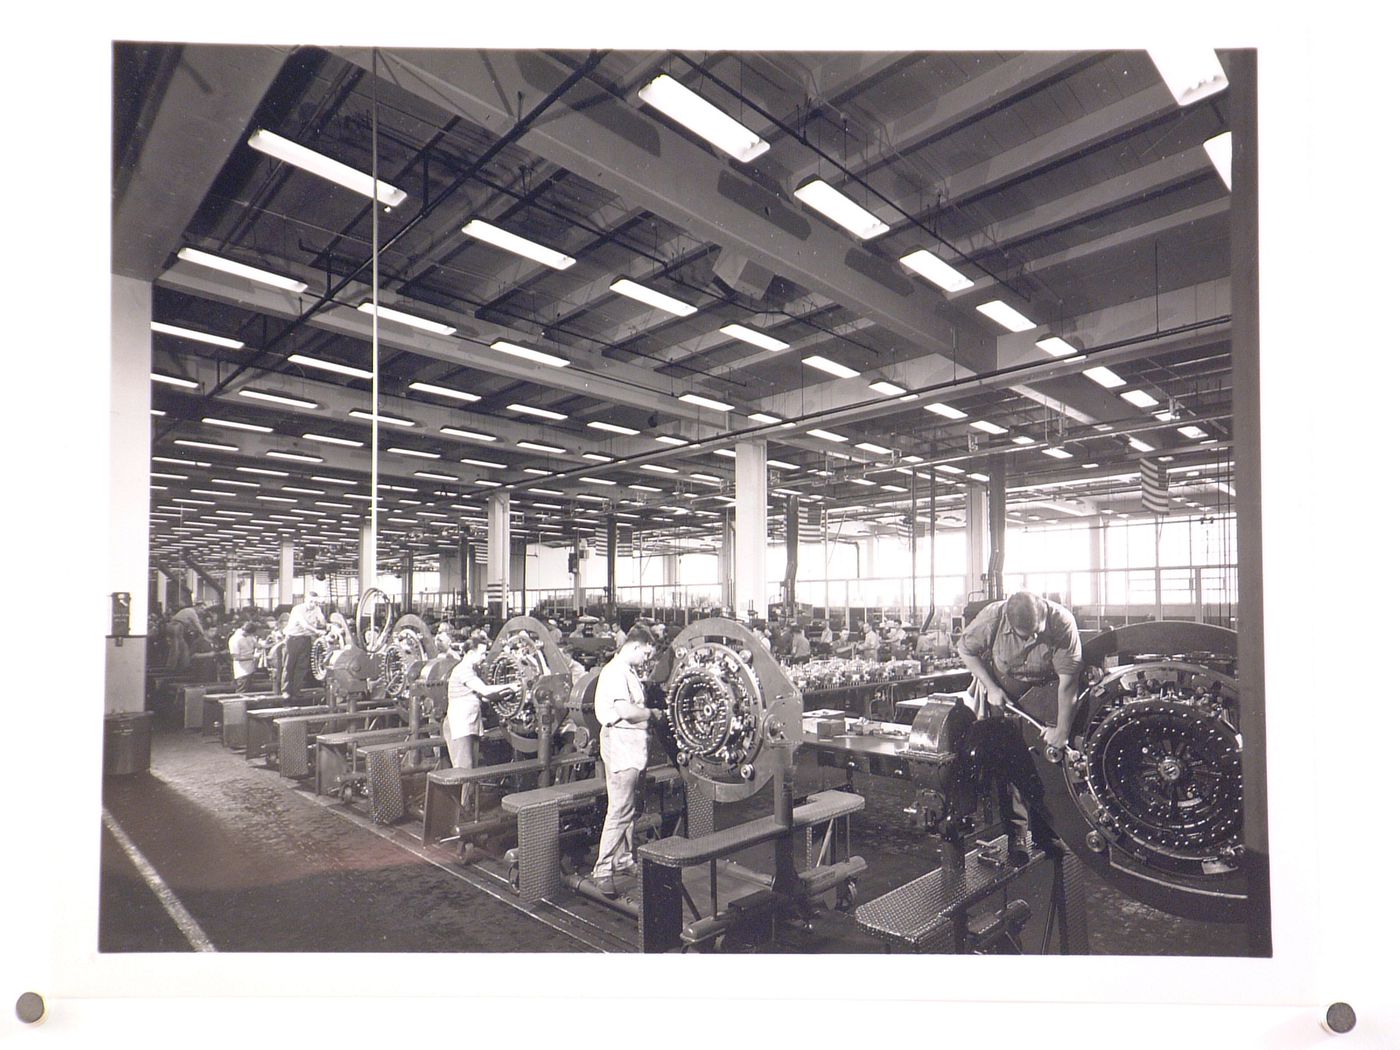 Interior view of the Motor Manufacturing Building showing workers assembling motors, Nash-Kelvinator Corporation Assembly Plant, Kenosha, Wisconsin